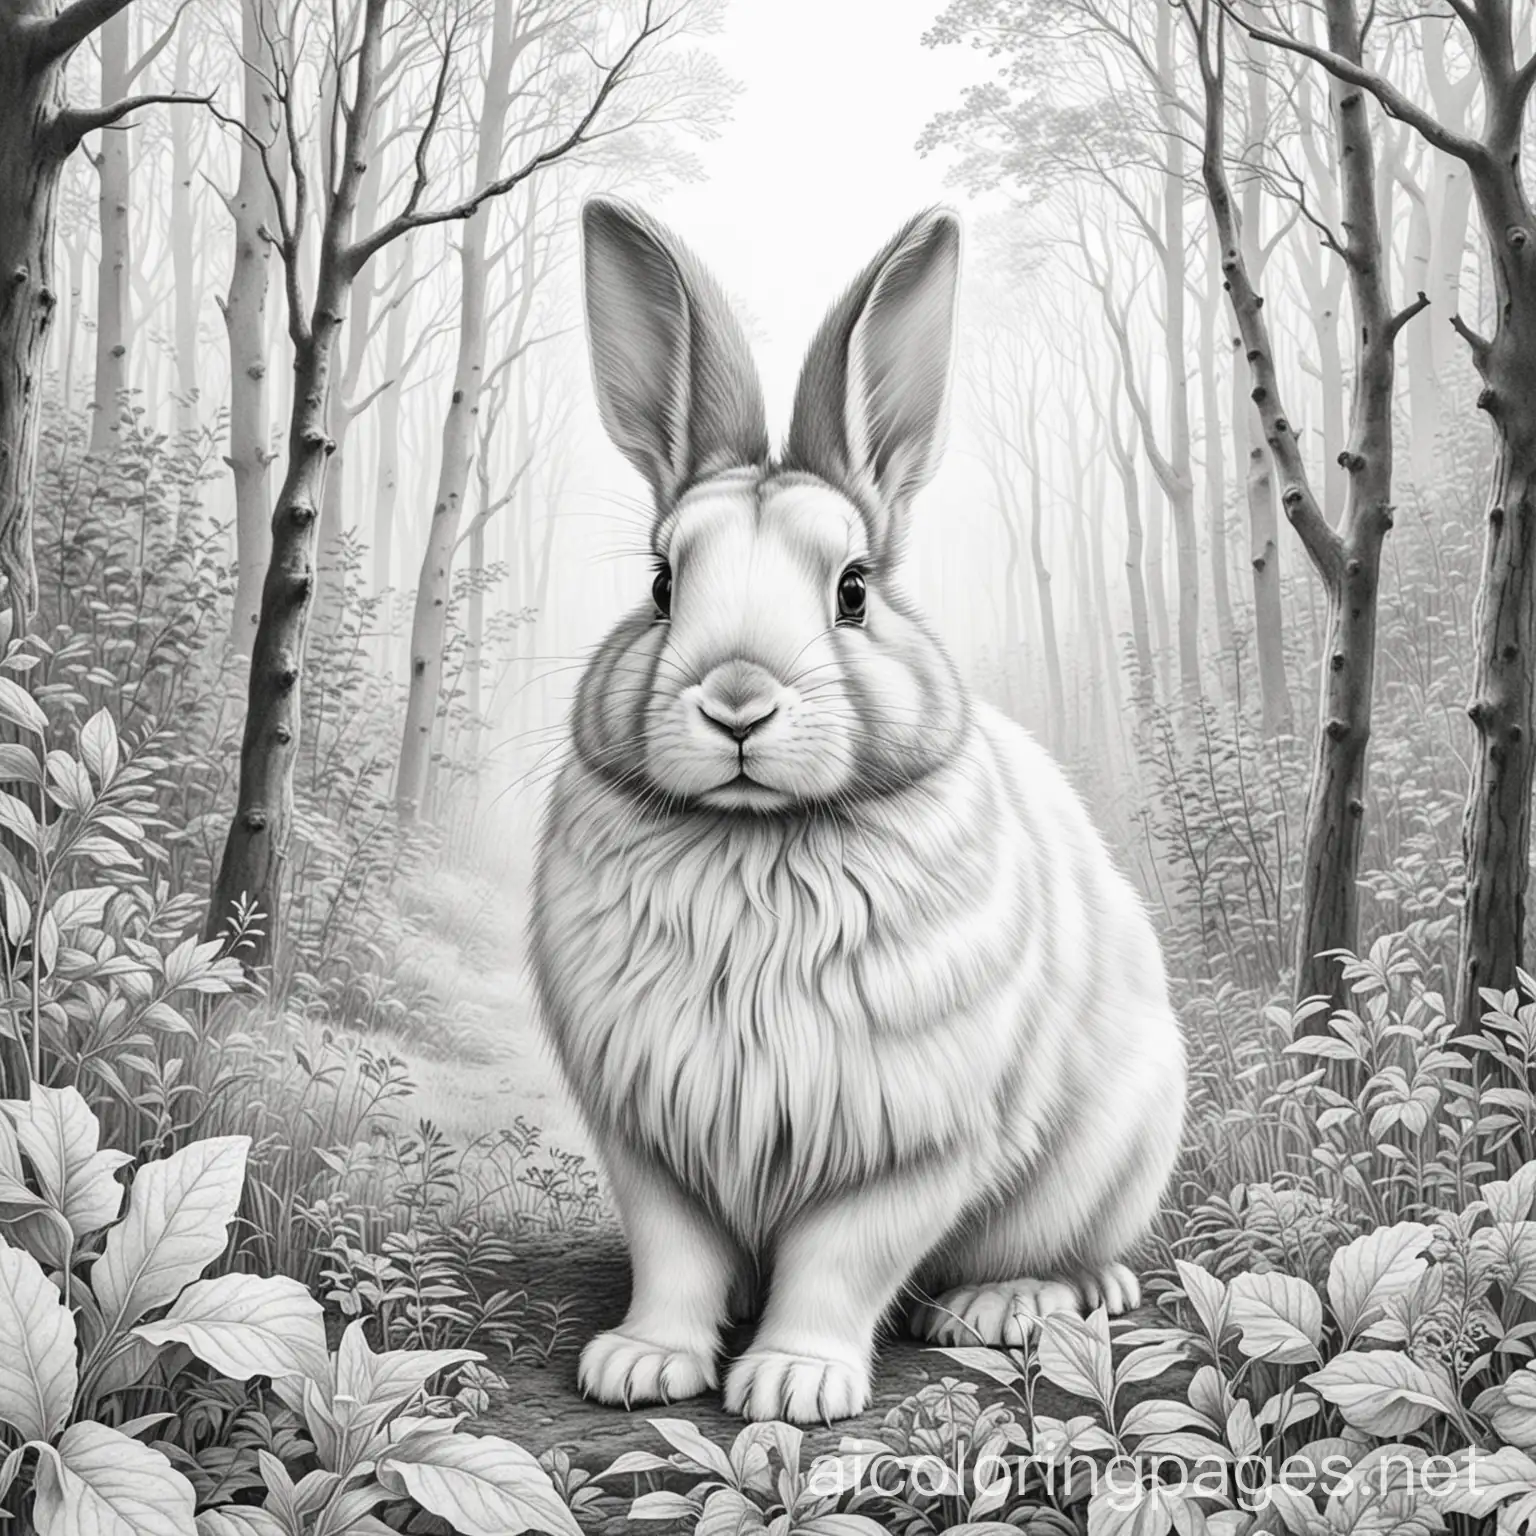 A Lionhead rabbit in the forest, Coloring Page, black and white, line art, white background, Simplicity, Ample White Space. The background of the coloring page is plain white to make it easy for young children to color within the lines. The outlines of all the subjects are easy to distinguish, making it simple for kids to color without too much difficulty